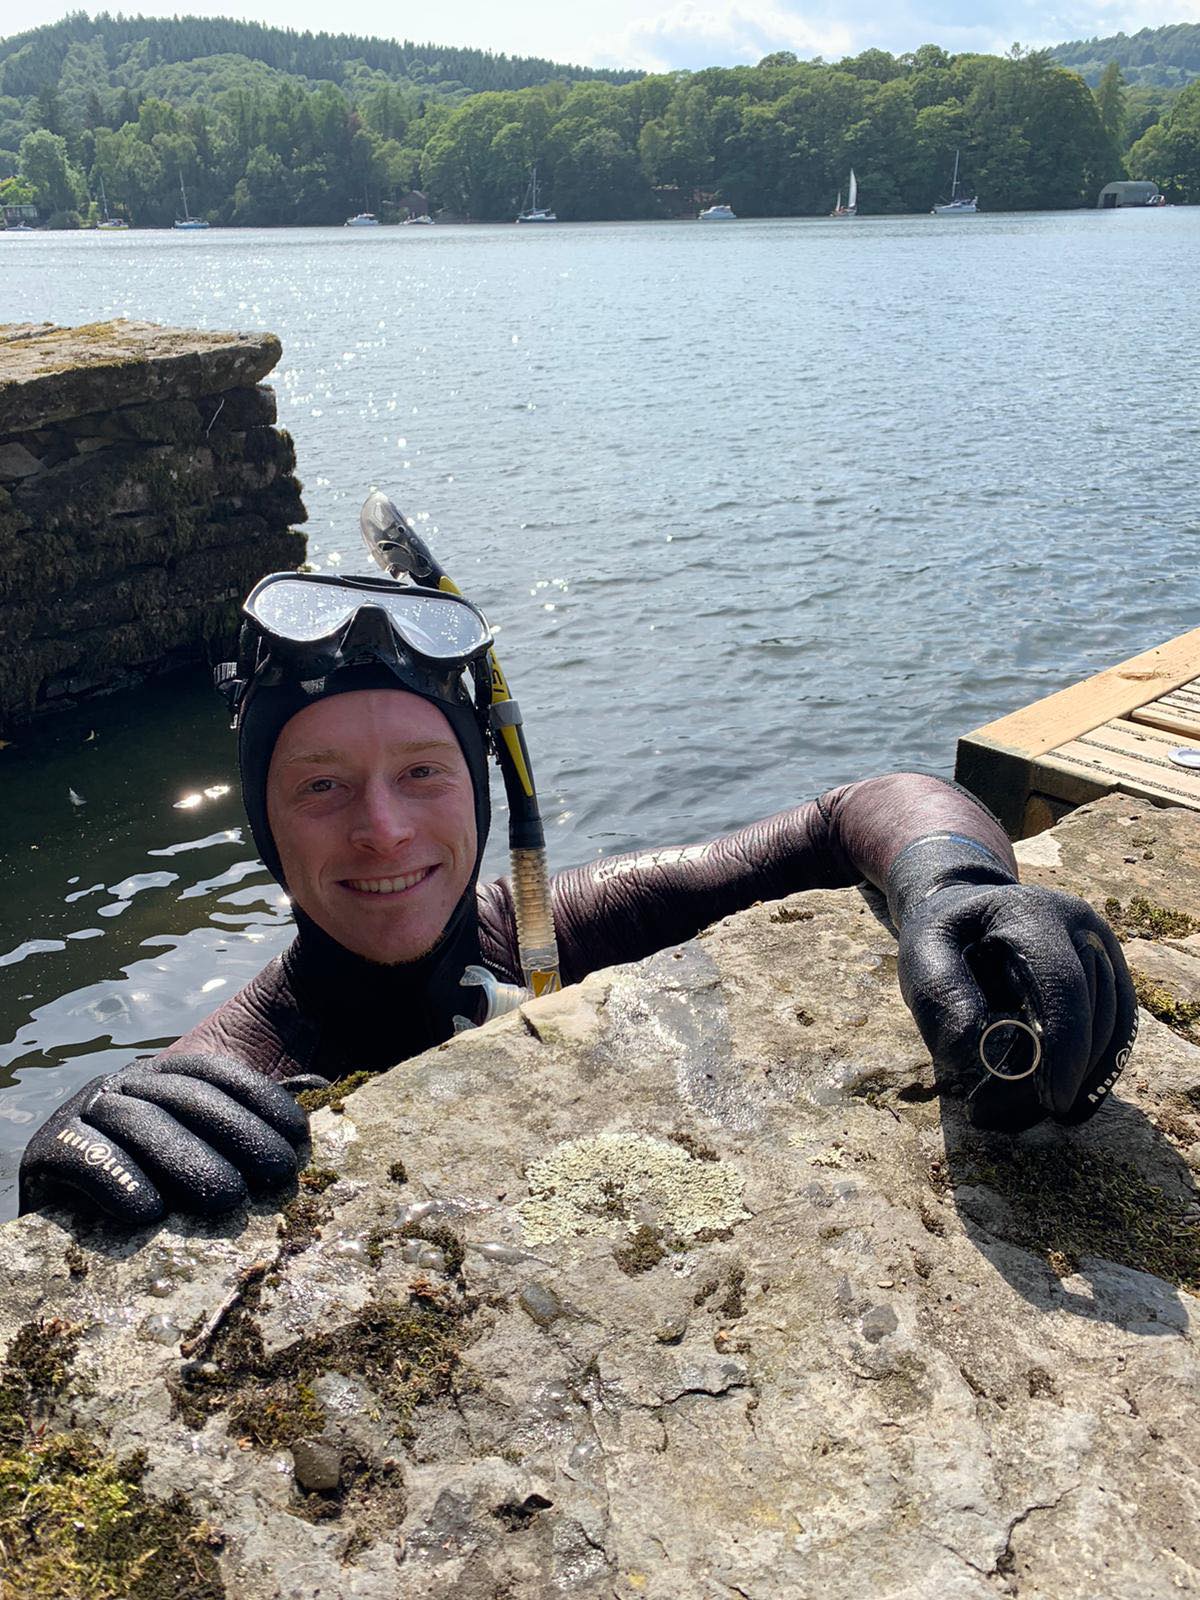 Lake District Diver Angus Hosking recovering the wedding ring of Annabelle and Mick Balchin after it was lost in Lake Windermere on their wedding day (Annabelle Balchin)